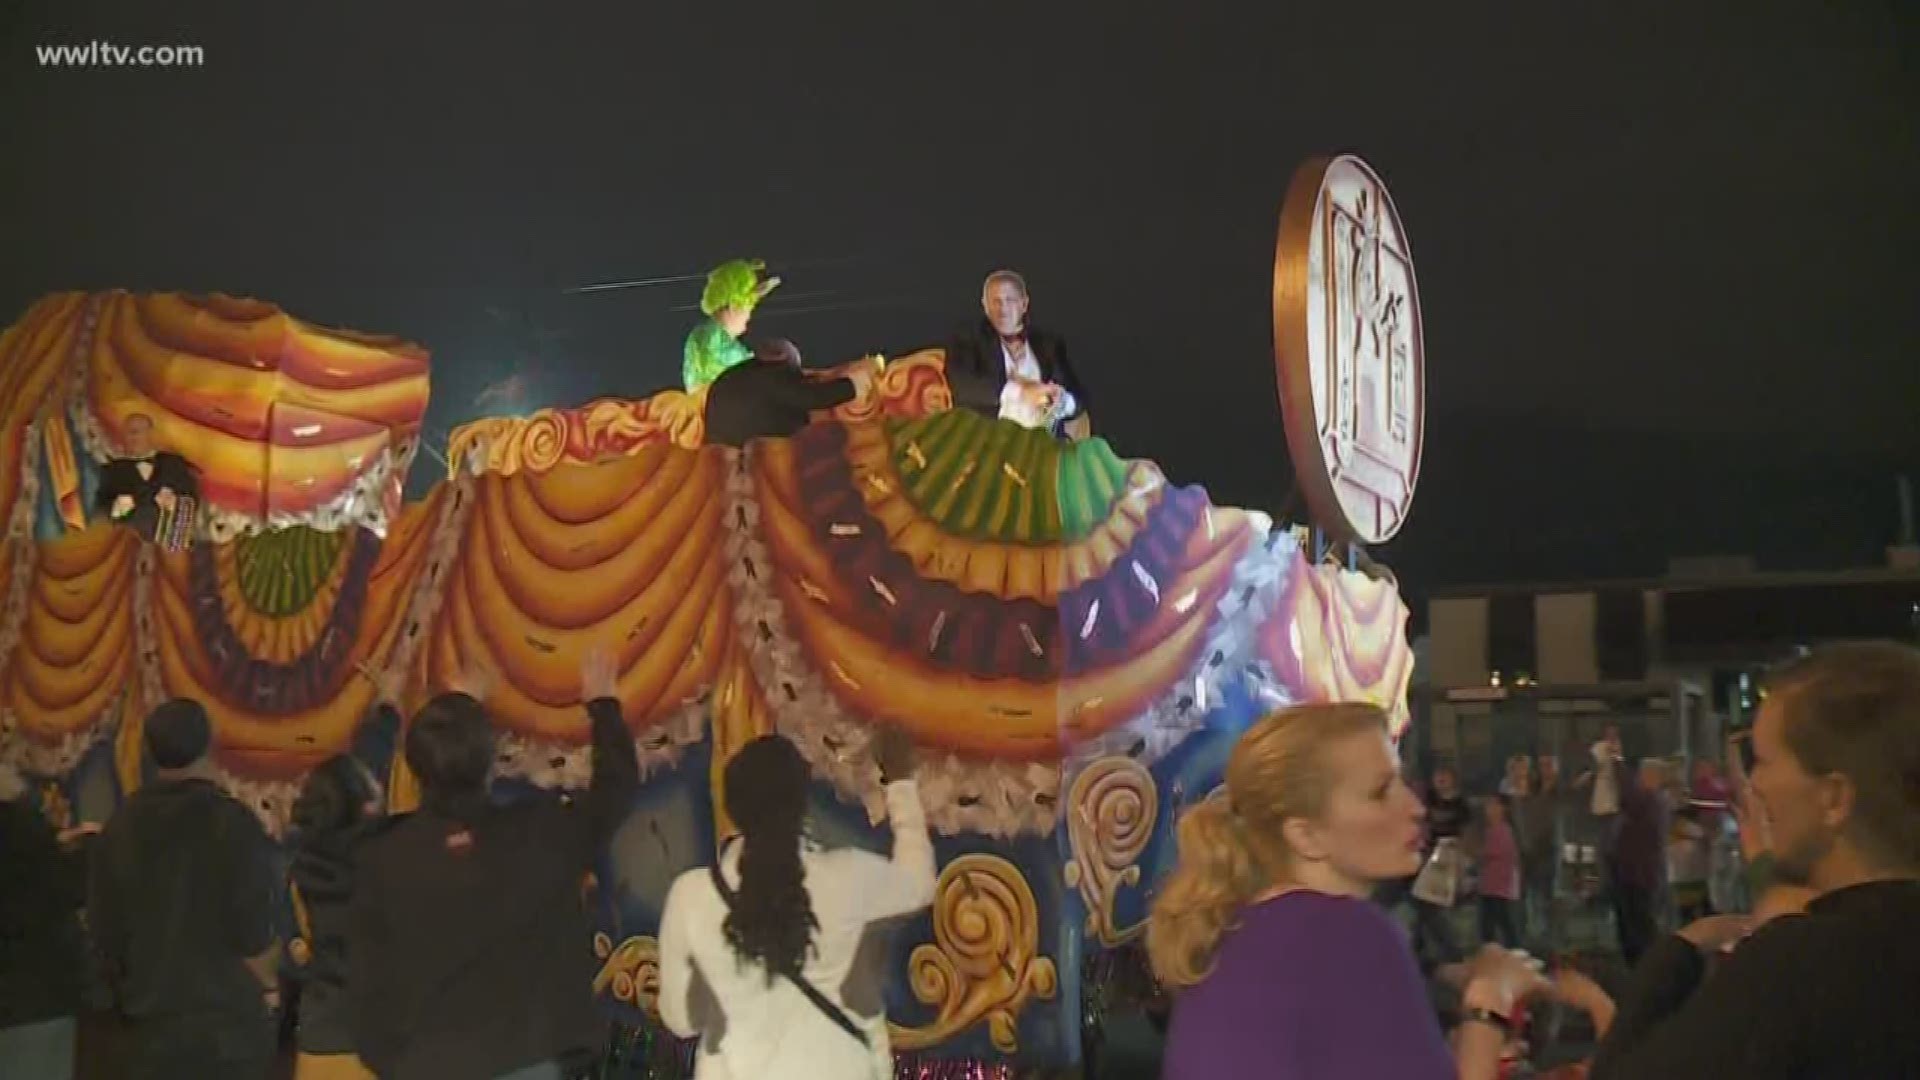 In an attempt to drum up interest in its Carnival parades, Jefferson Parish is considering altering its traditional parade route - possibly reversing it.